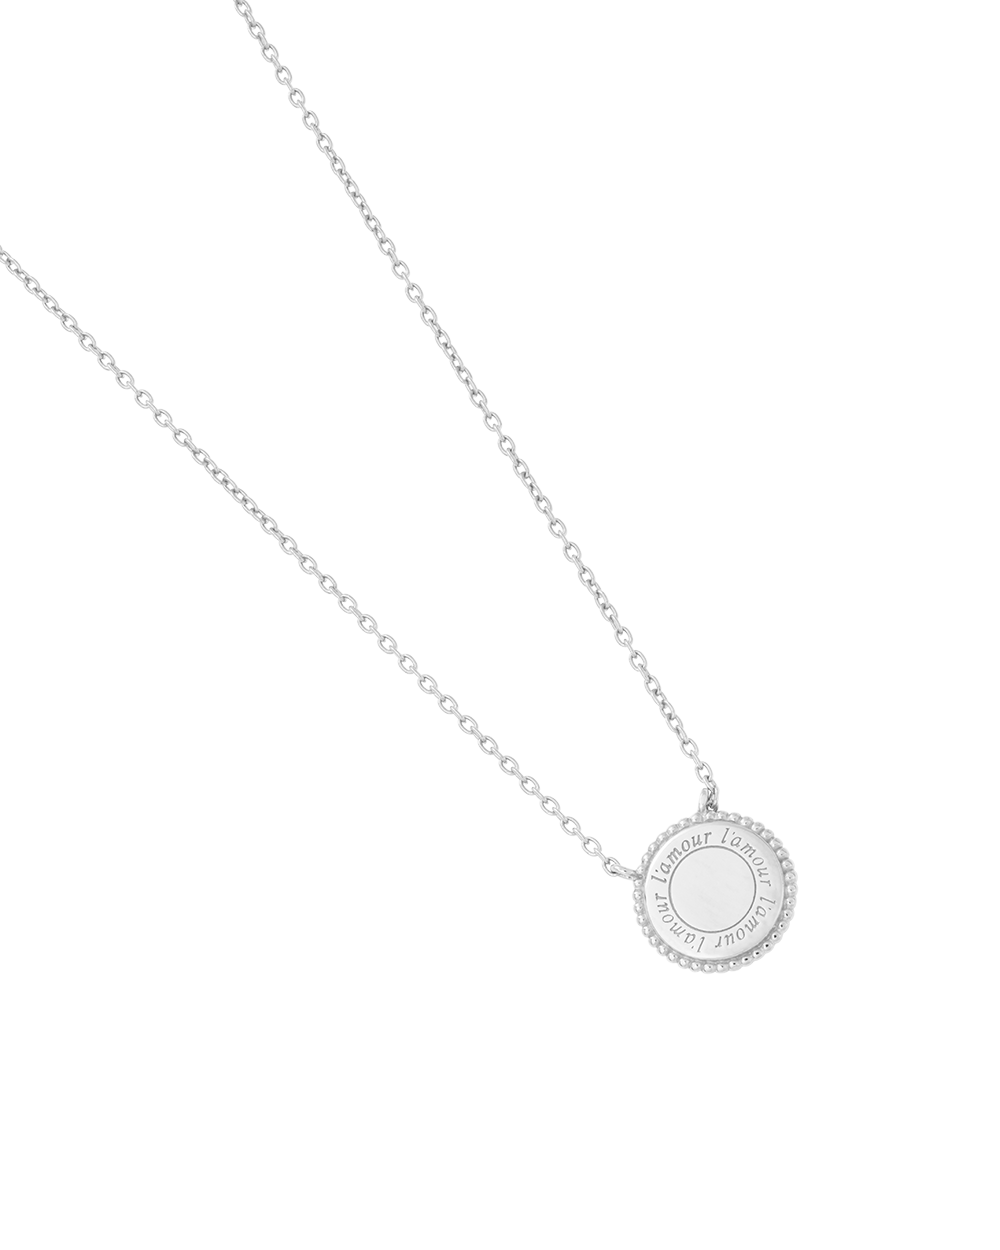 L'AMOUR NECKLACE (STERLING SILVER)